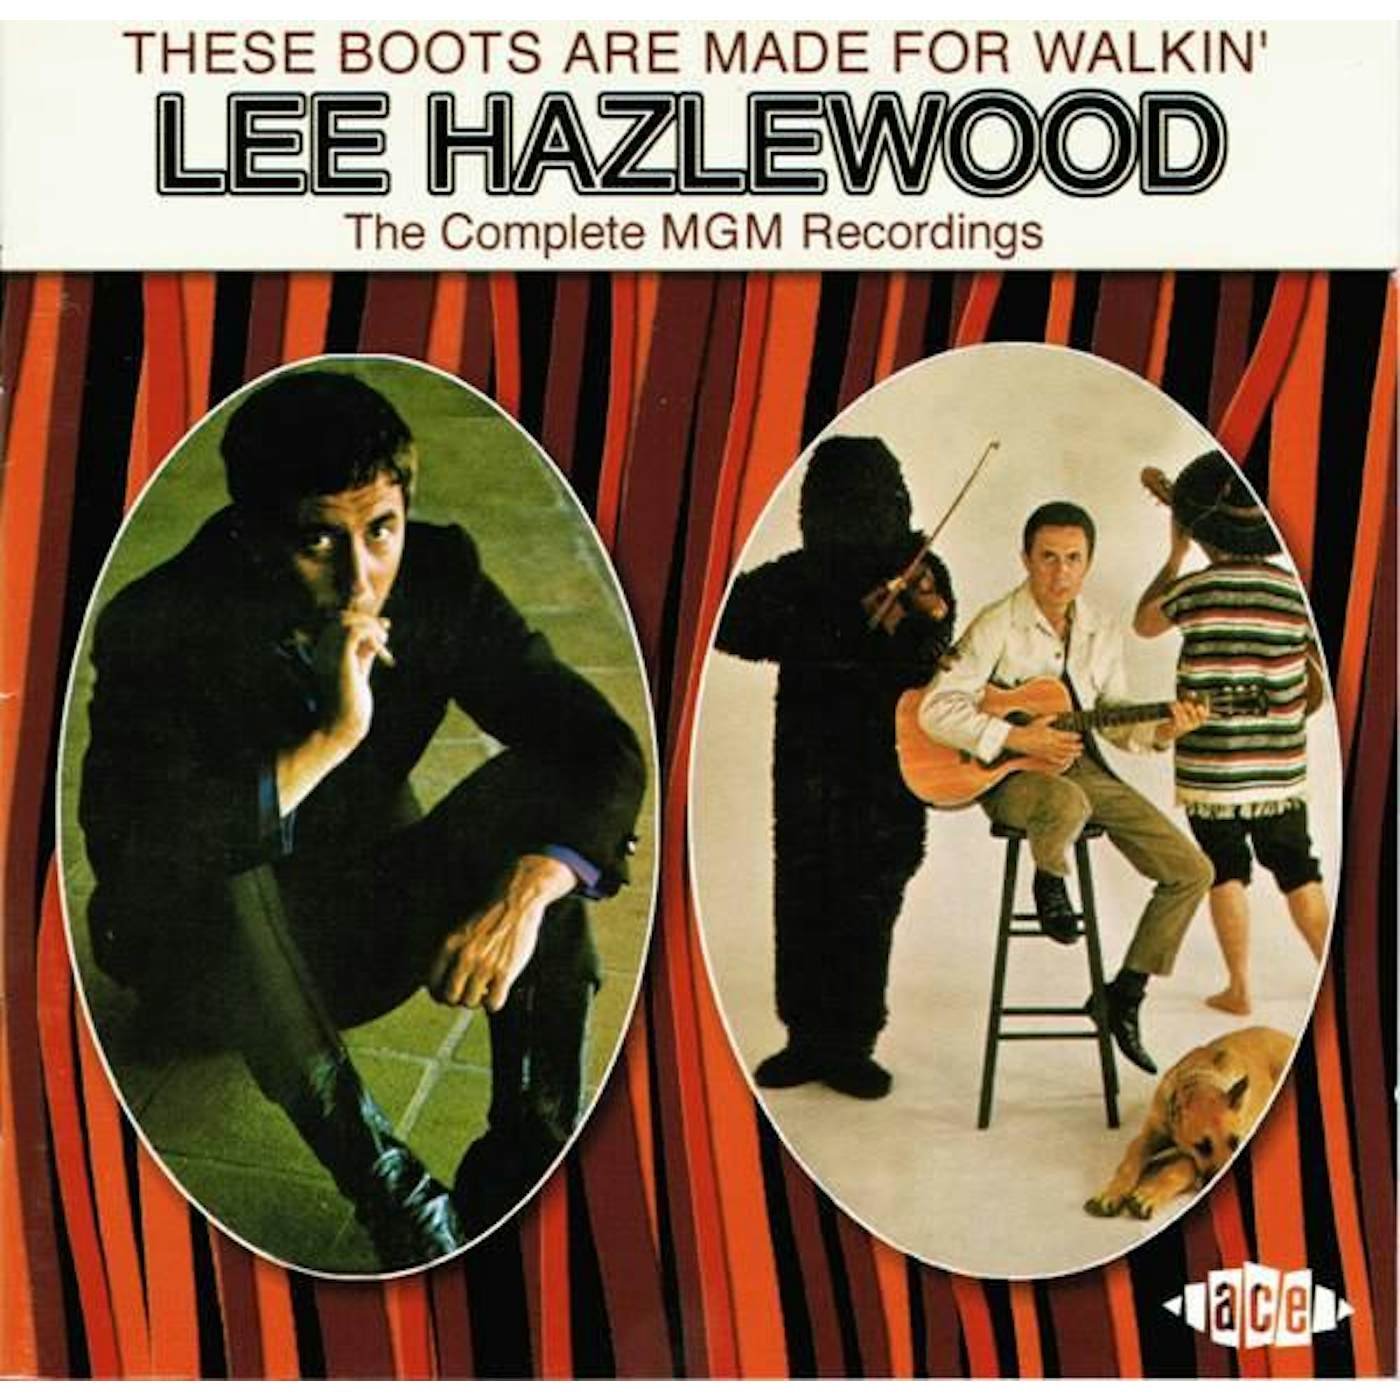 Lee Hazlewood THESE BOOT ARE MADE FOR WALKIN: COMPLETE MGM CD